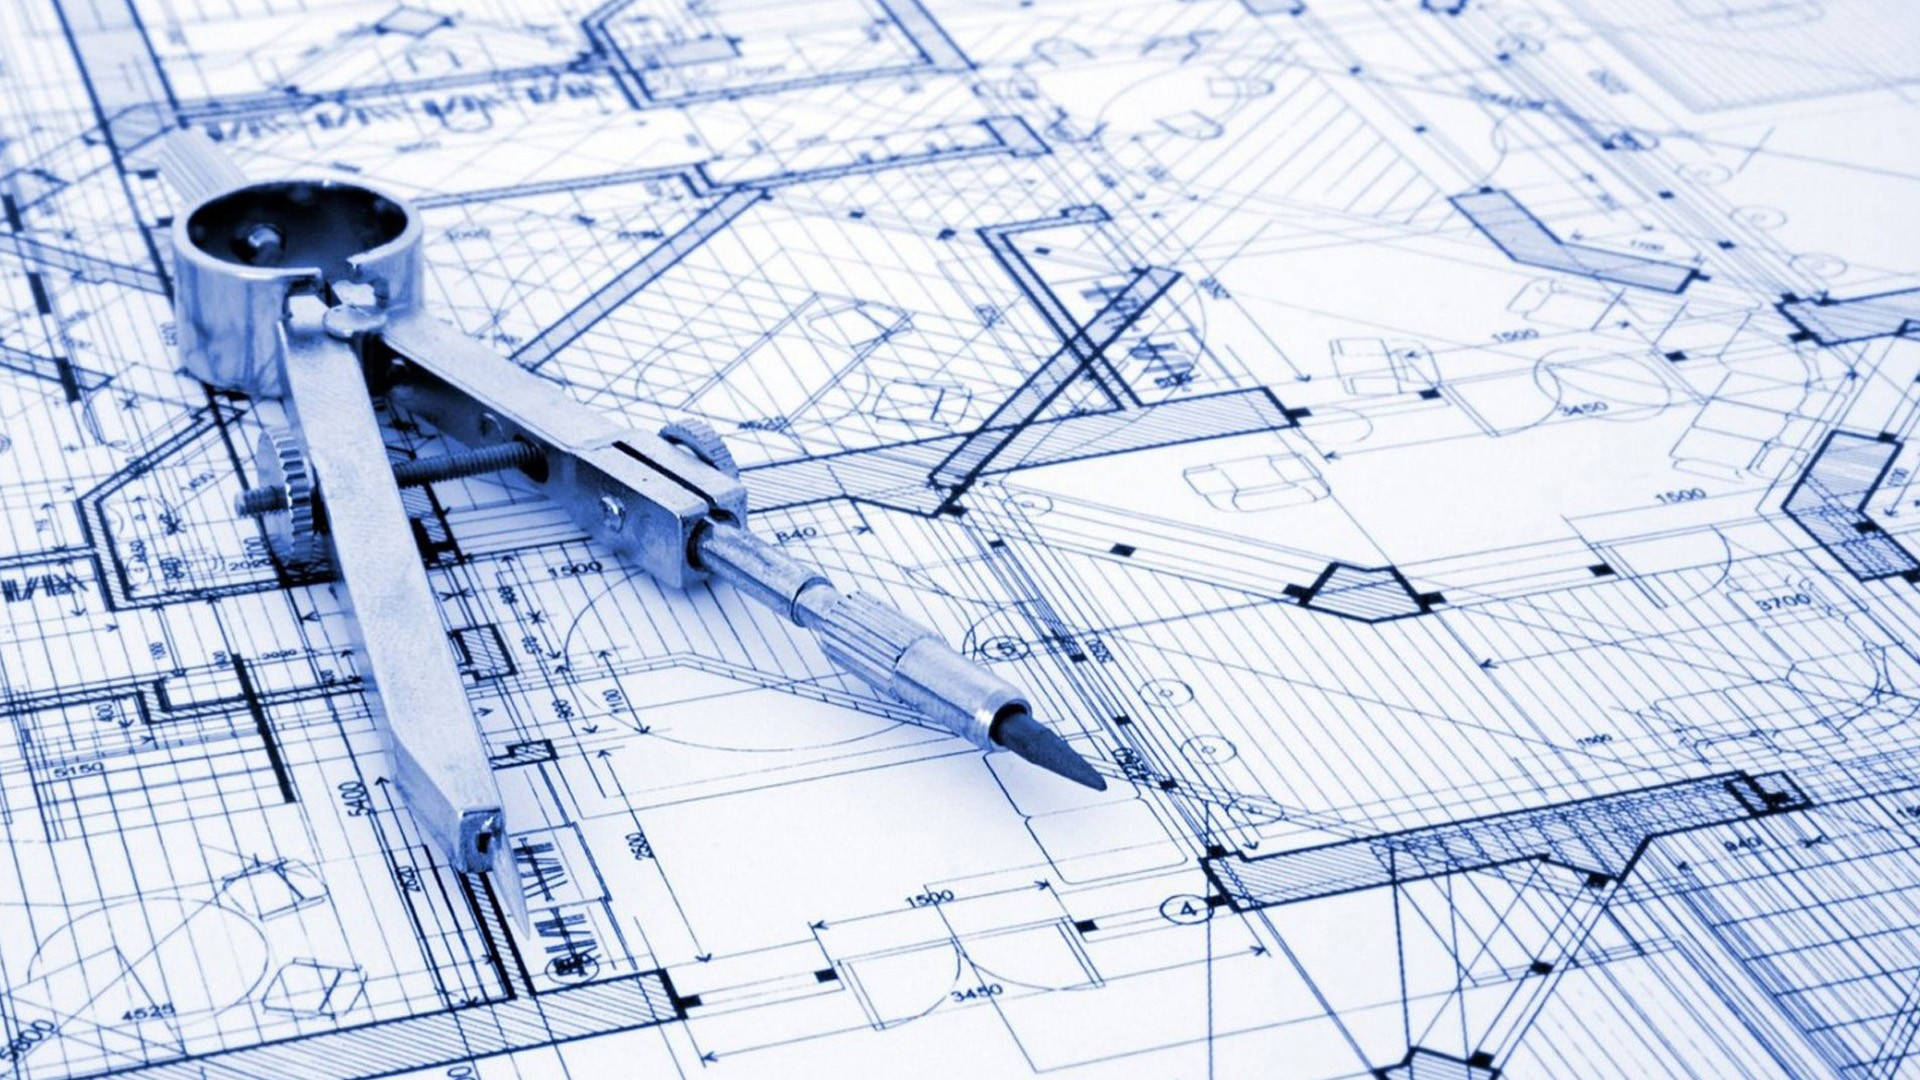 Hd Engineering Blueprint Close-up Picture